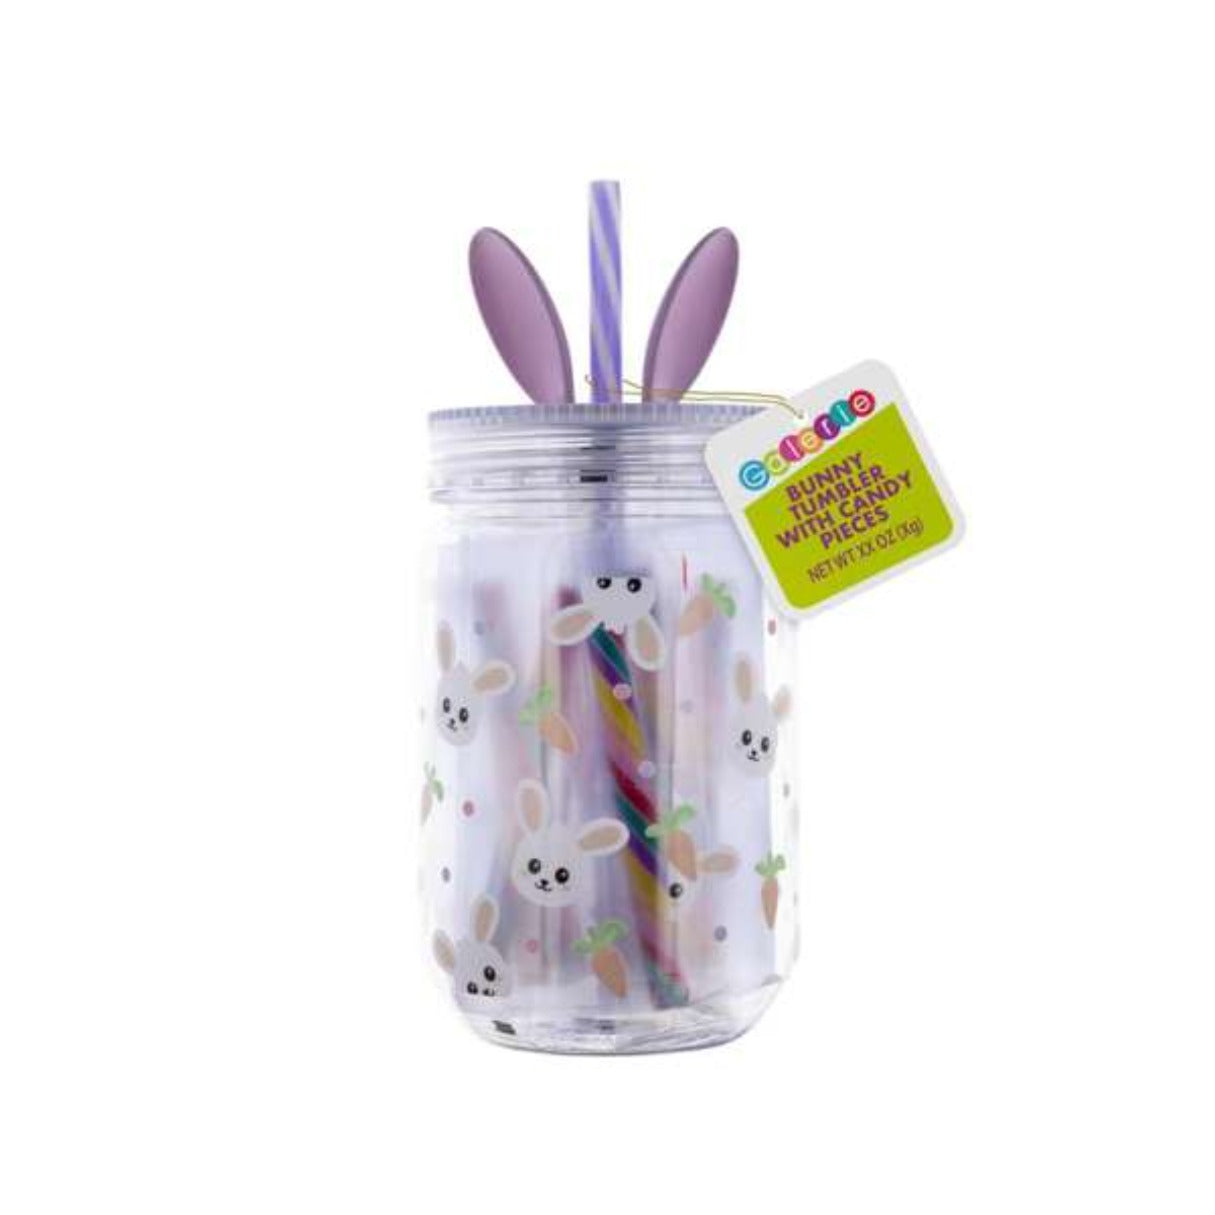 Galerie Jug Tumbler with Bunny Ear - 4ct